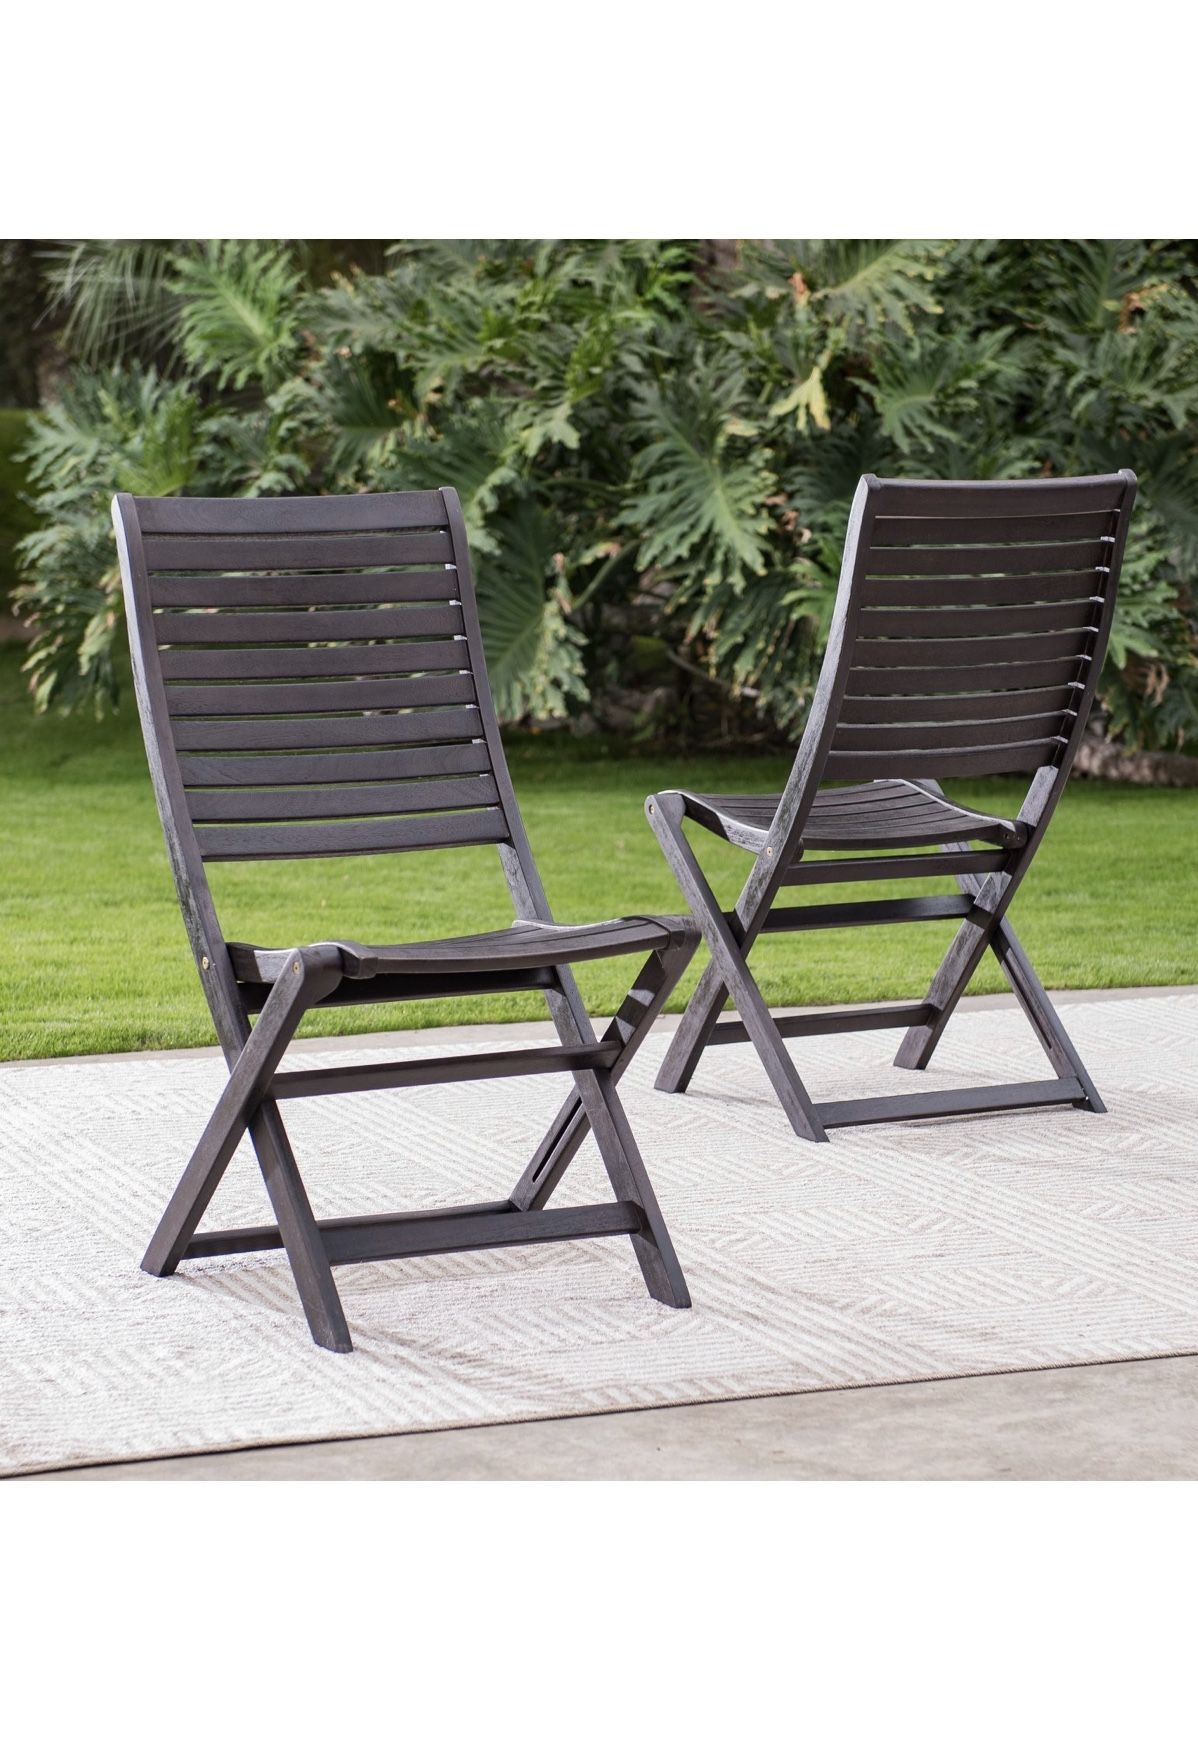 Coral Coast Colter Bay Outdoor Armless Folding Dining Chair - Set of 2 (total 4 chairs )